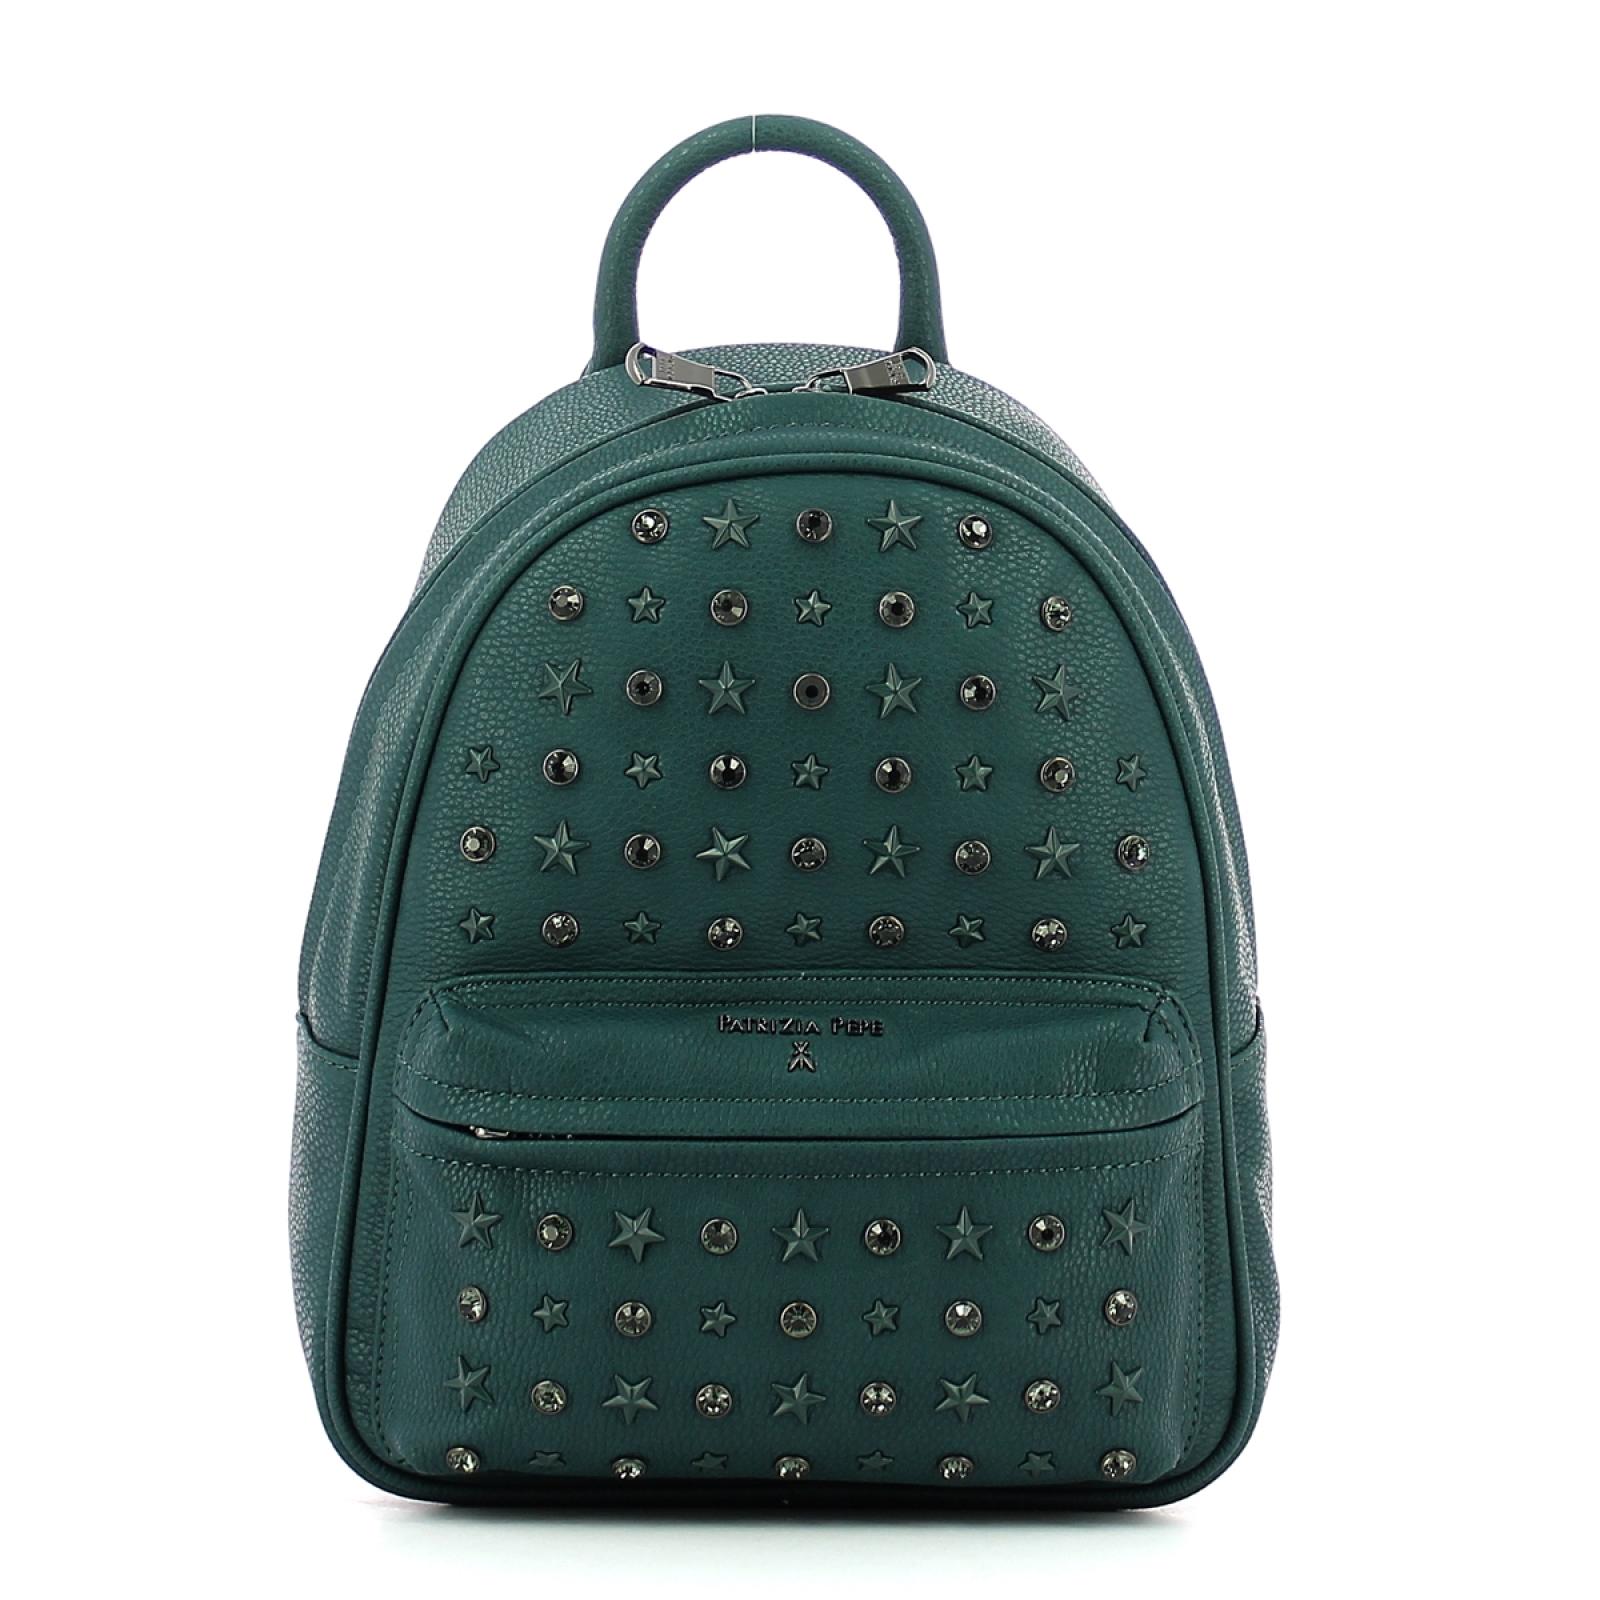 Backpack with studs